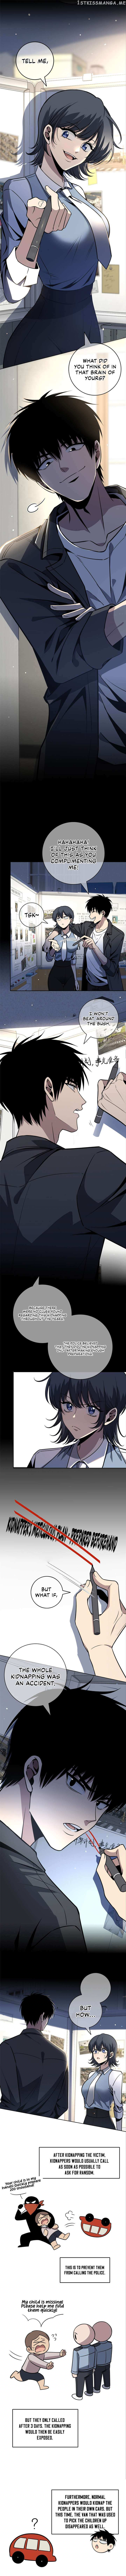 Mad Detective - Page 2